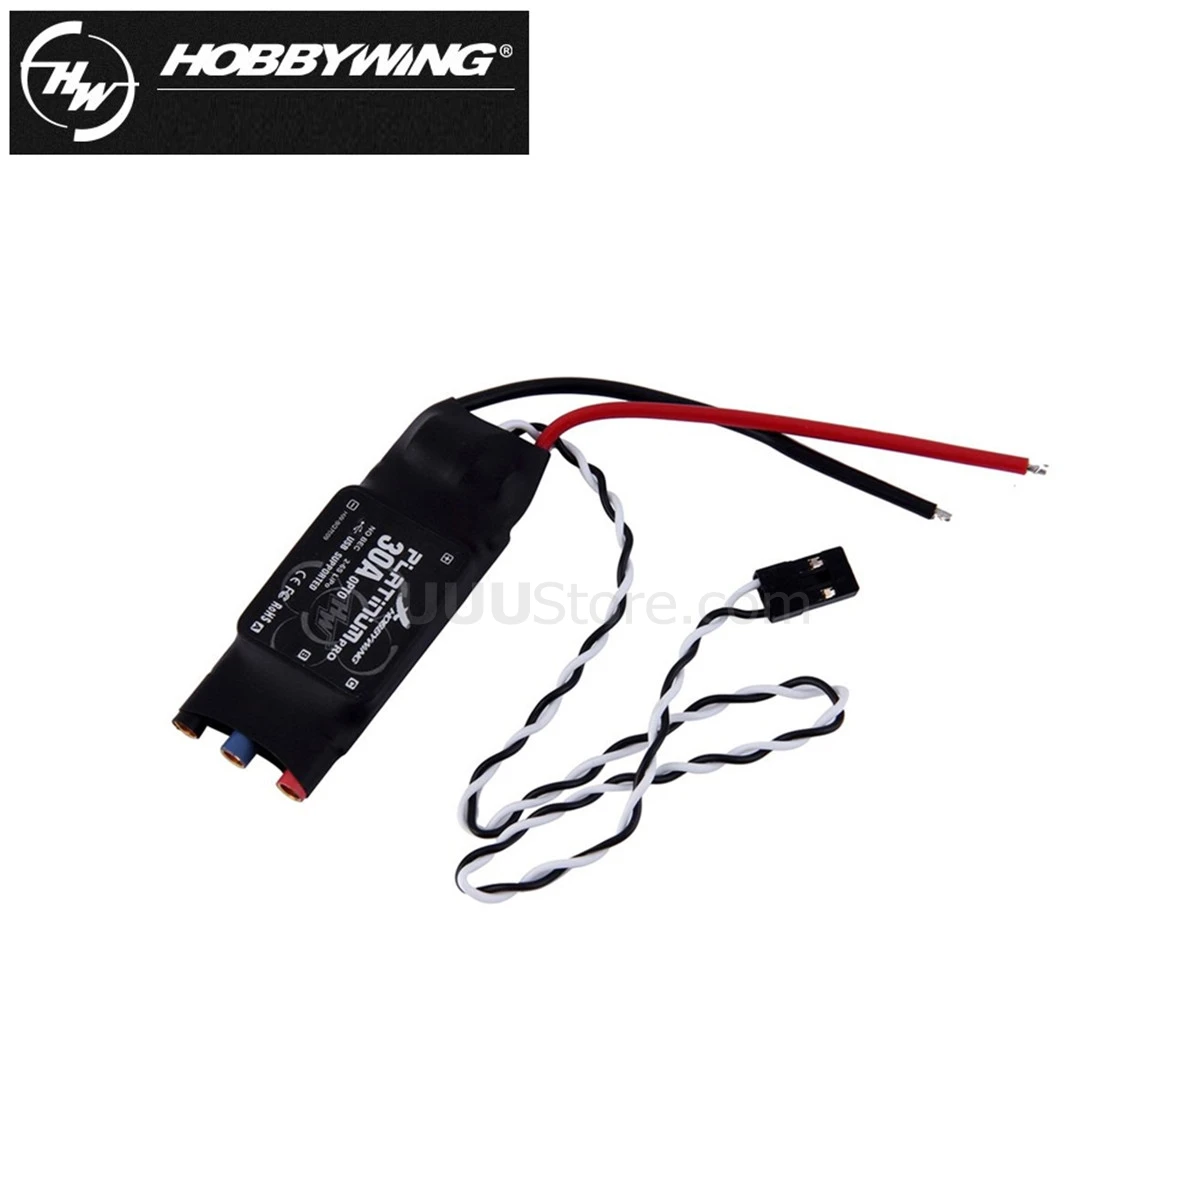 4pcs/lot HOBBYWING Platinum 30A Pro 2-6S Electric Speed Controller (ESC) OPTO for Quadcopter Hexacopter Multi Rotor Drone 5